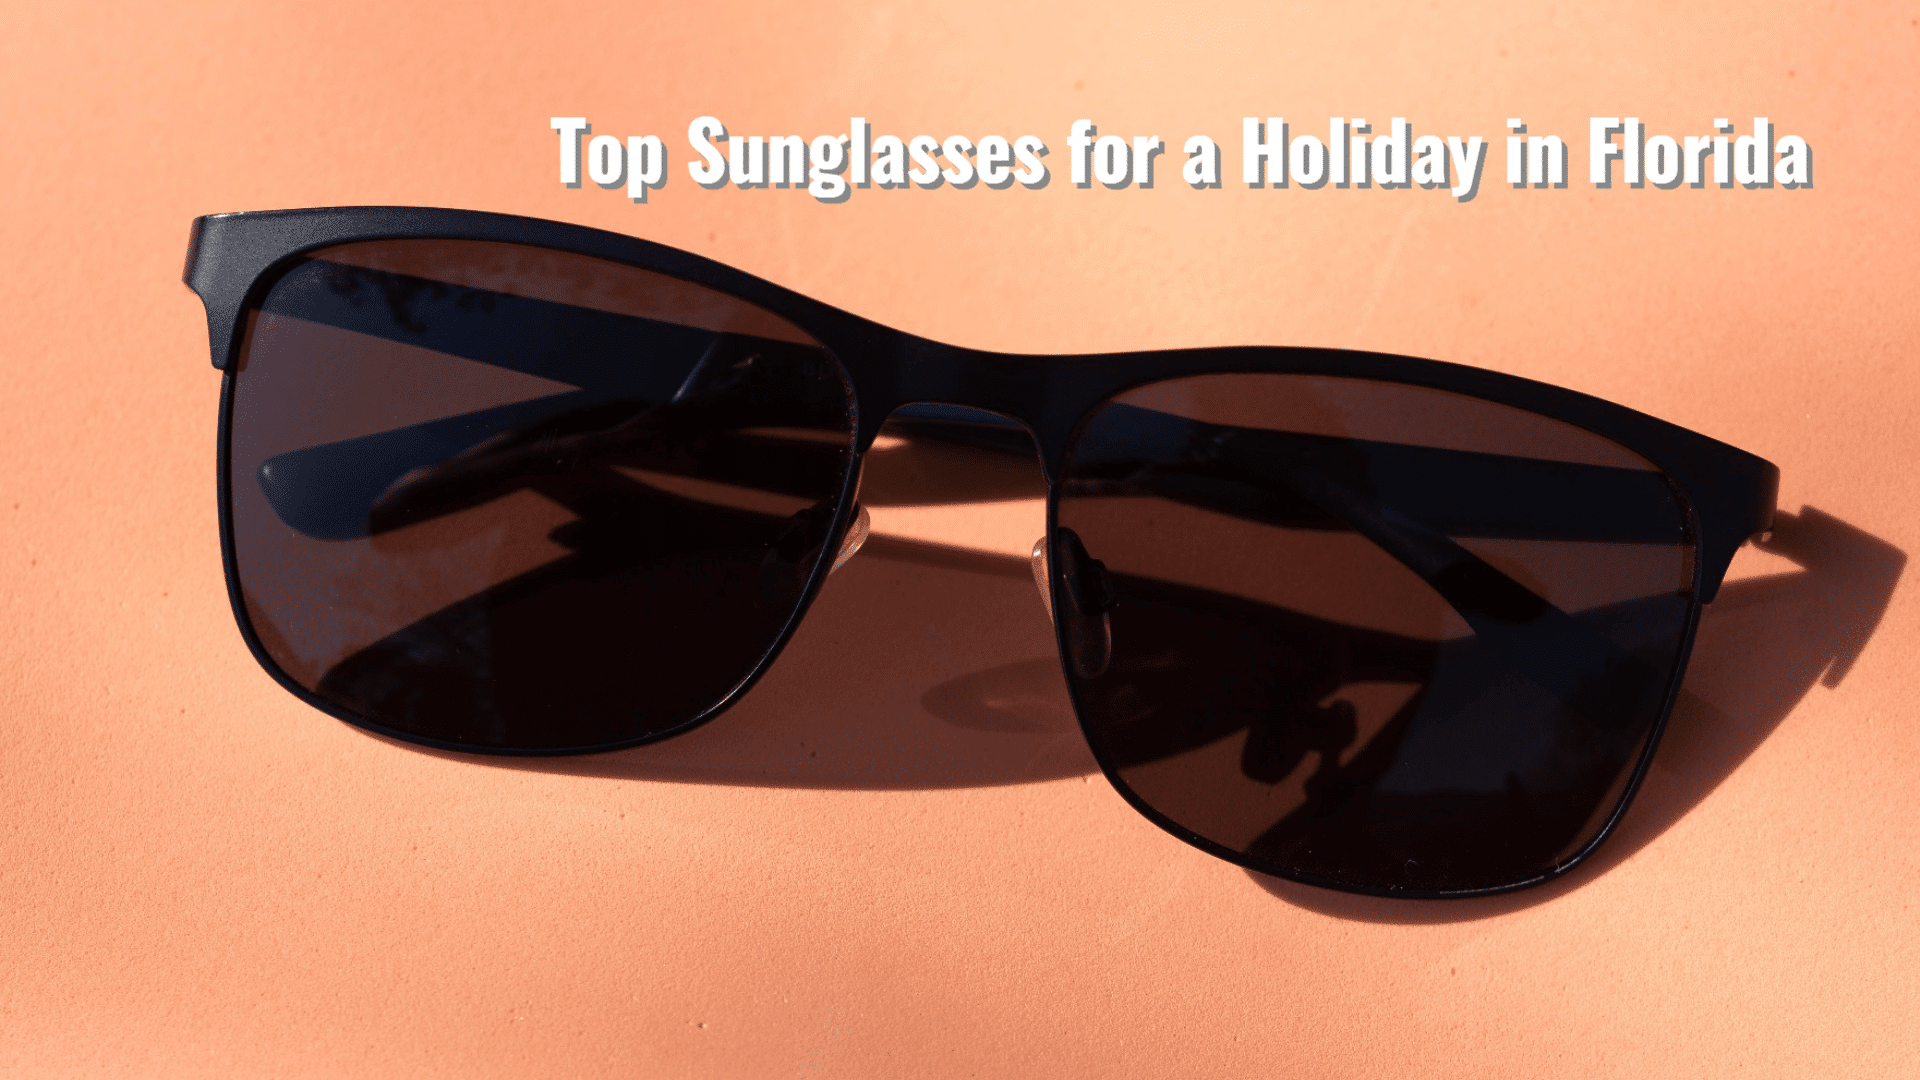 Top Sunglasses for a Holiday in Florida